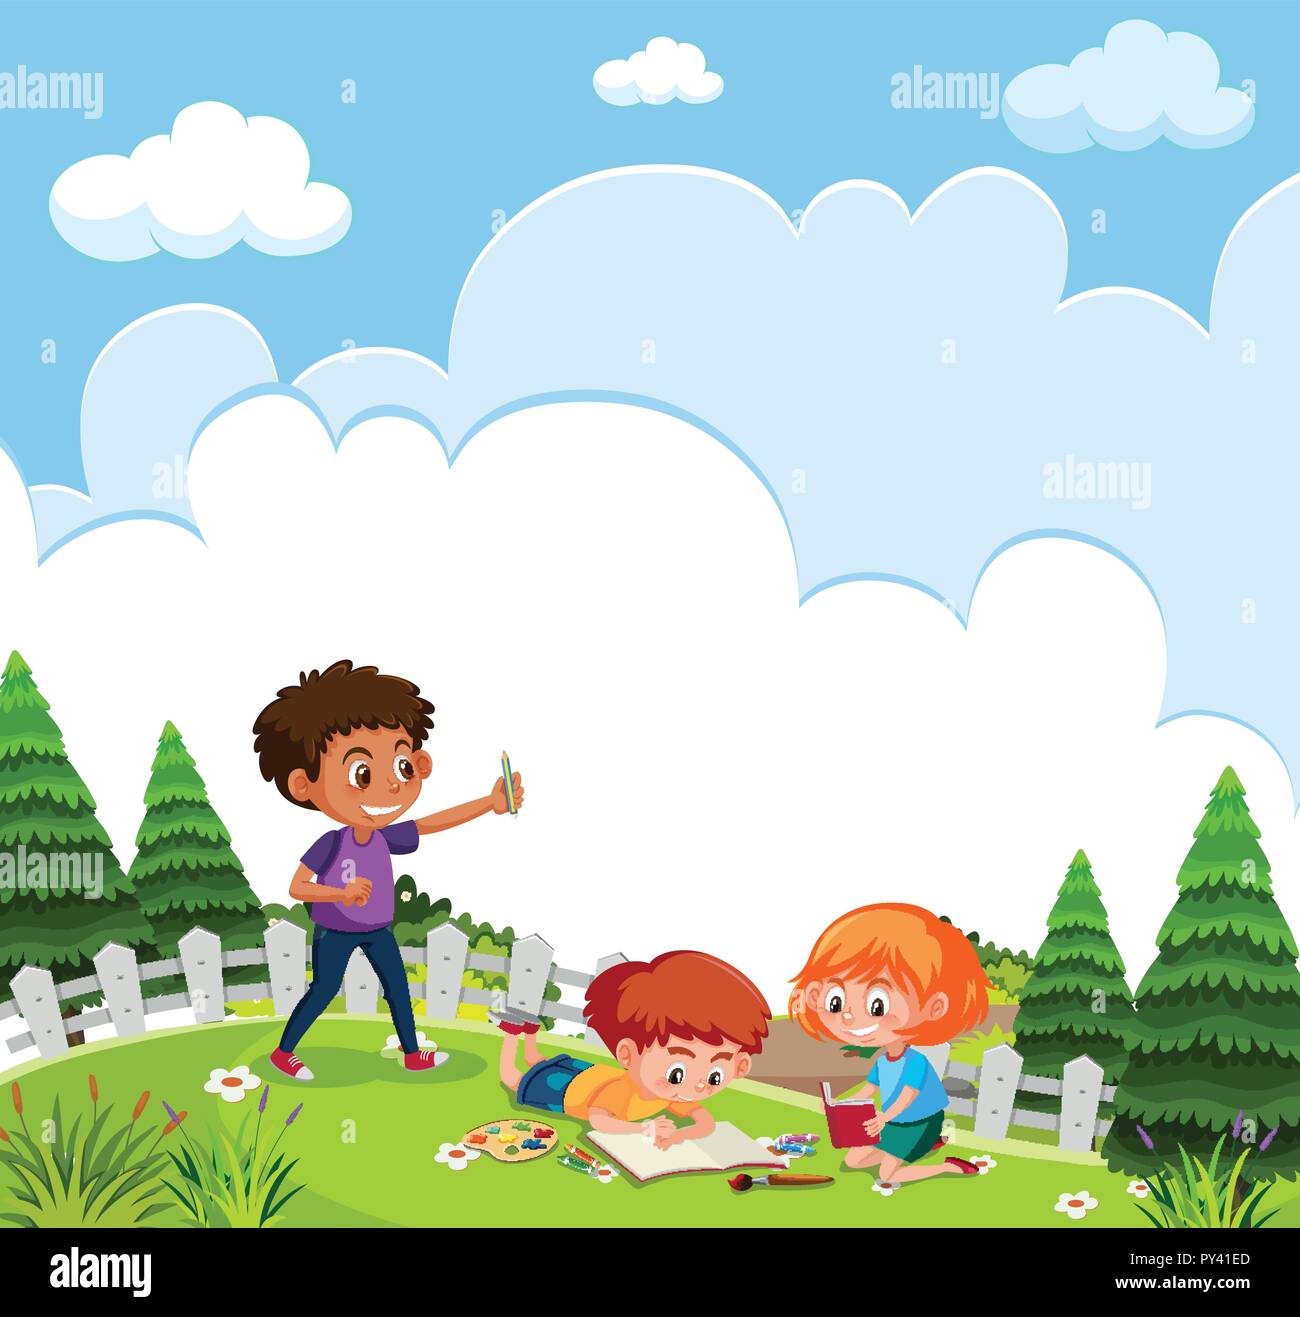 Children drawing nature Stock Vector Images - Alamy